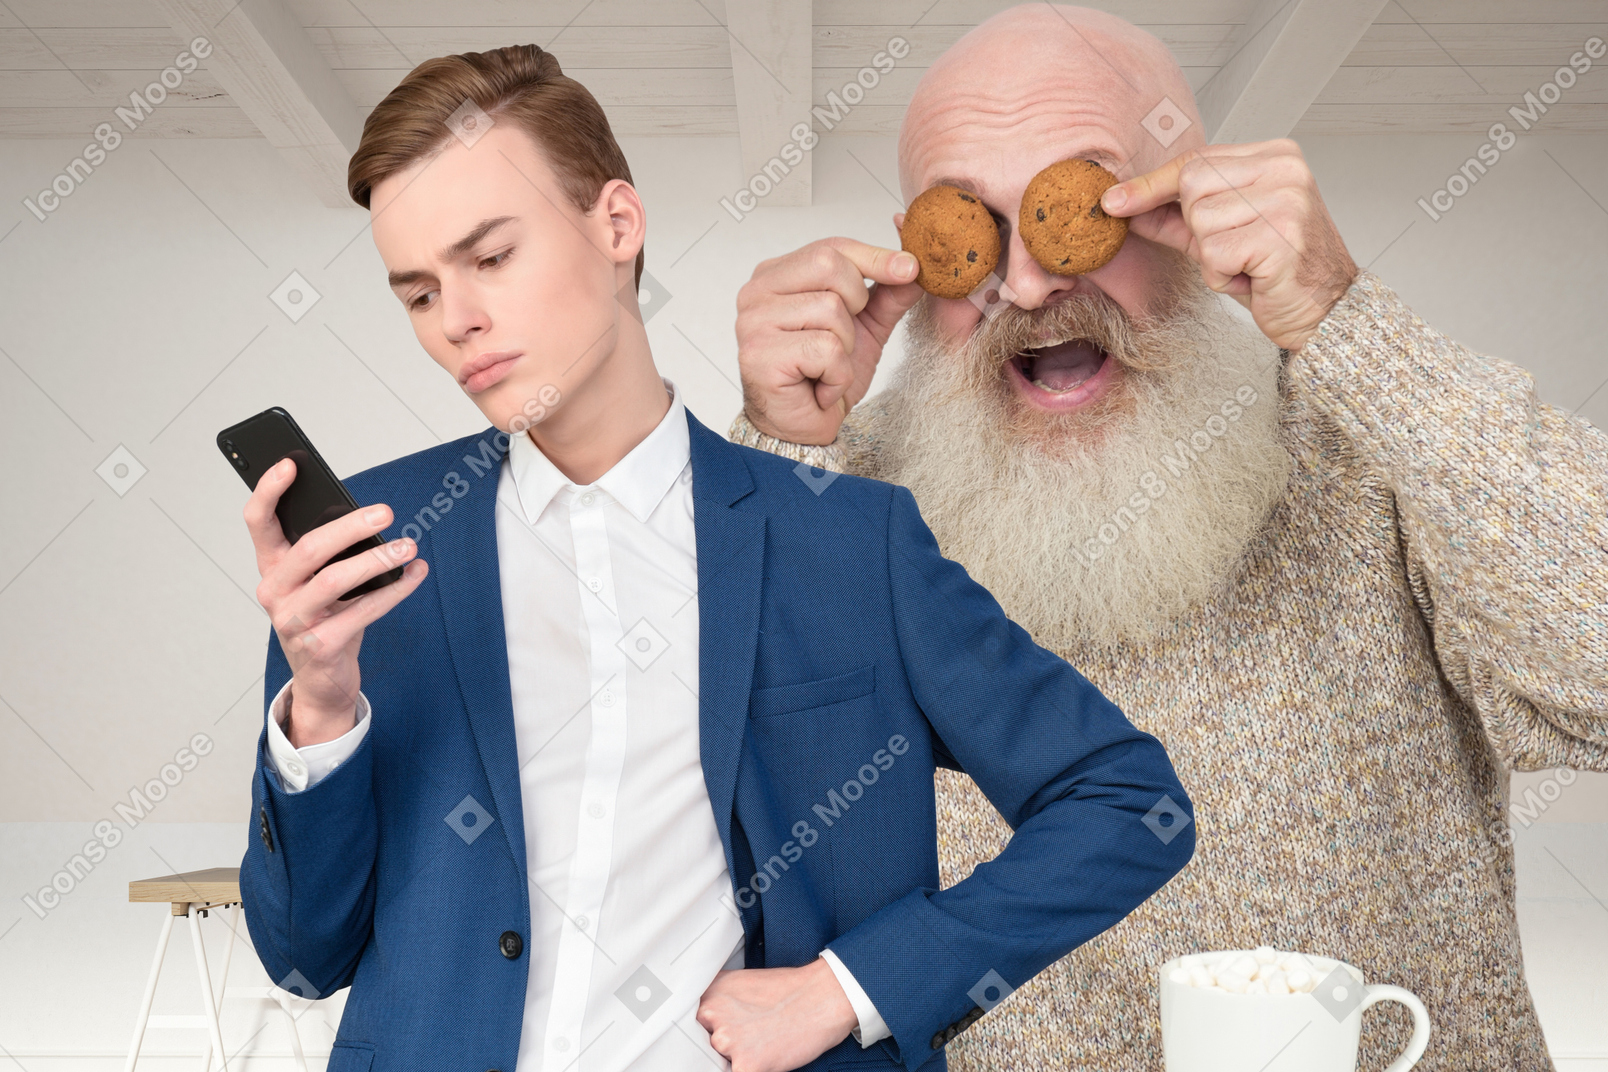 An old man trying to scare a young man